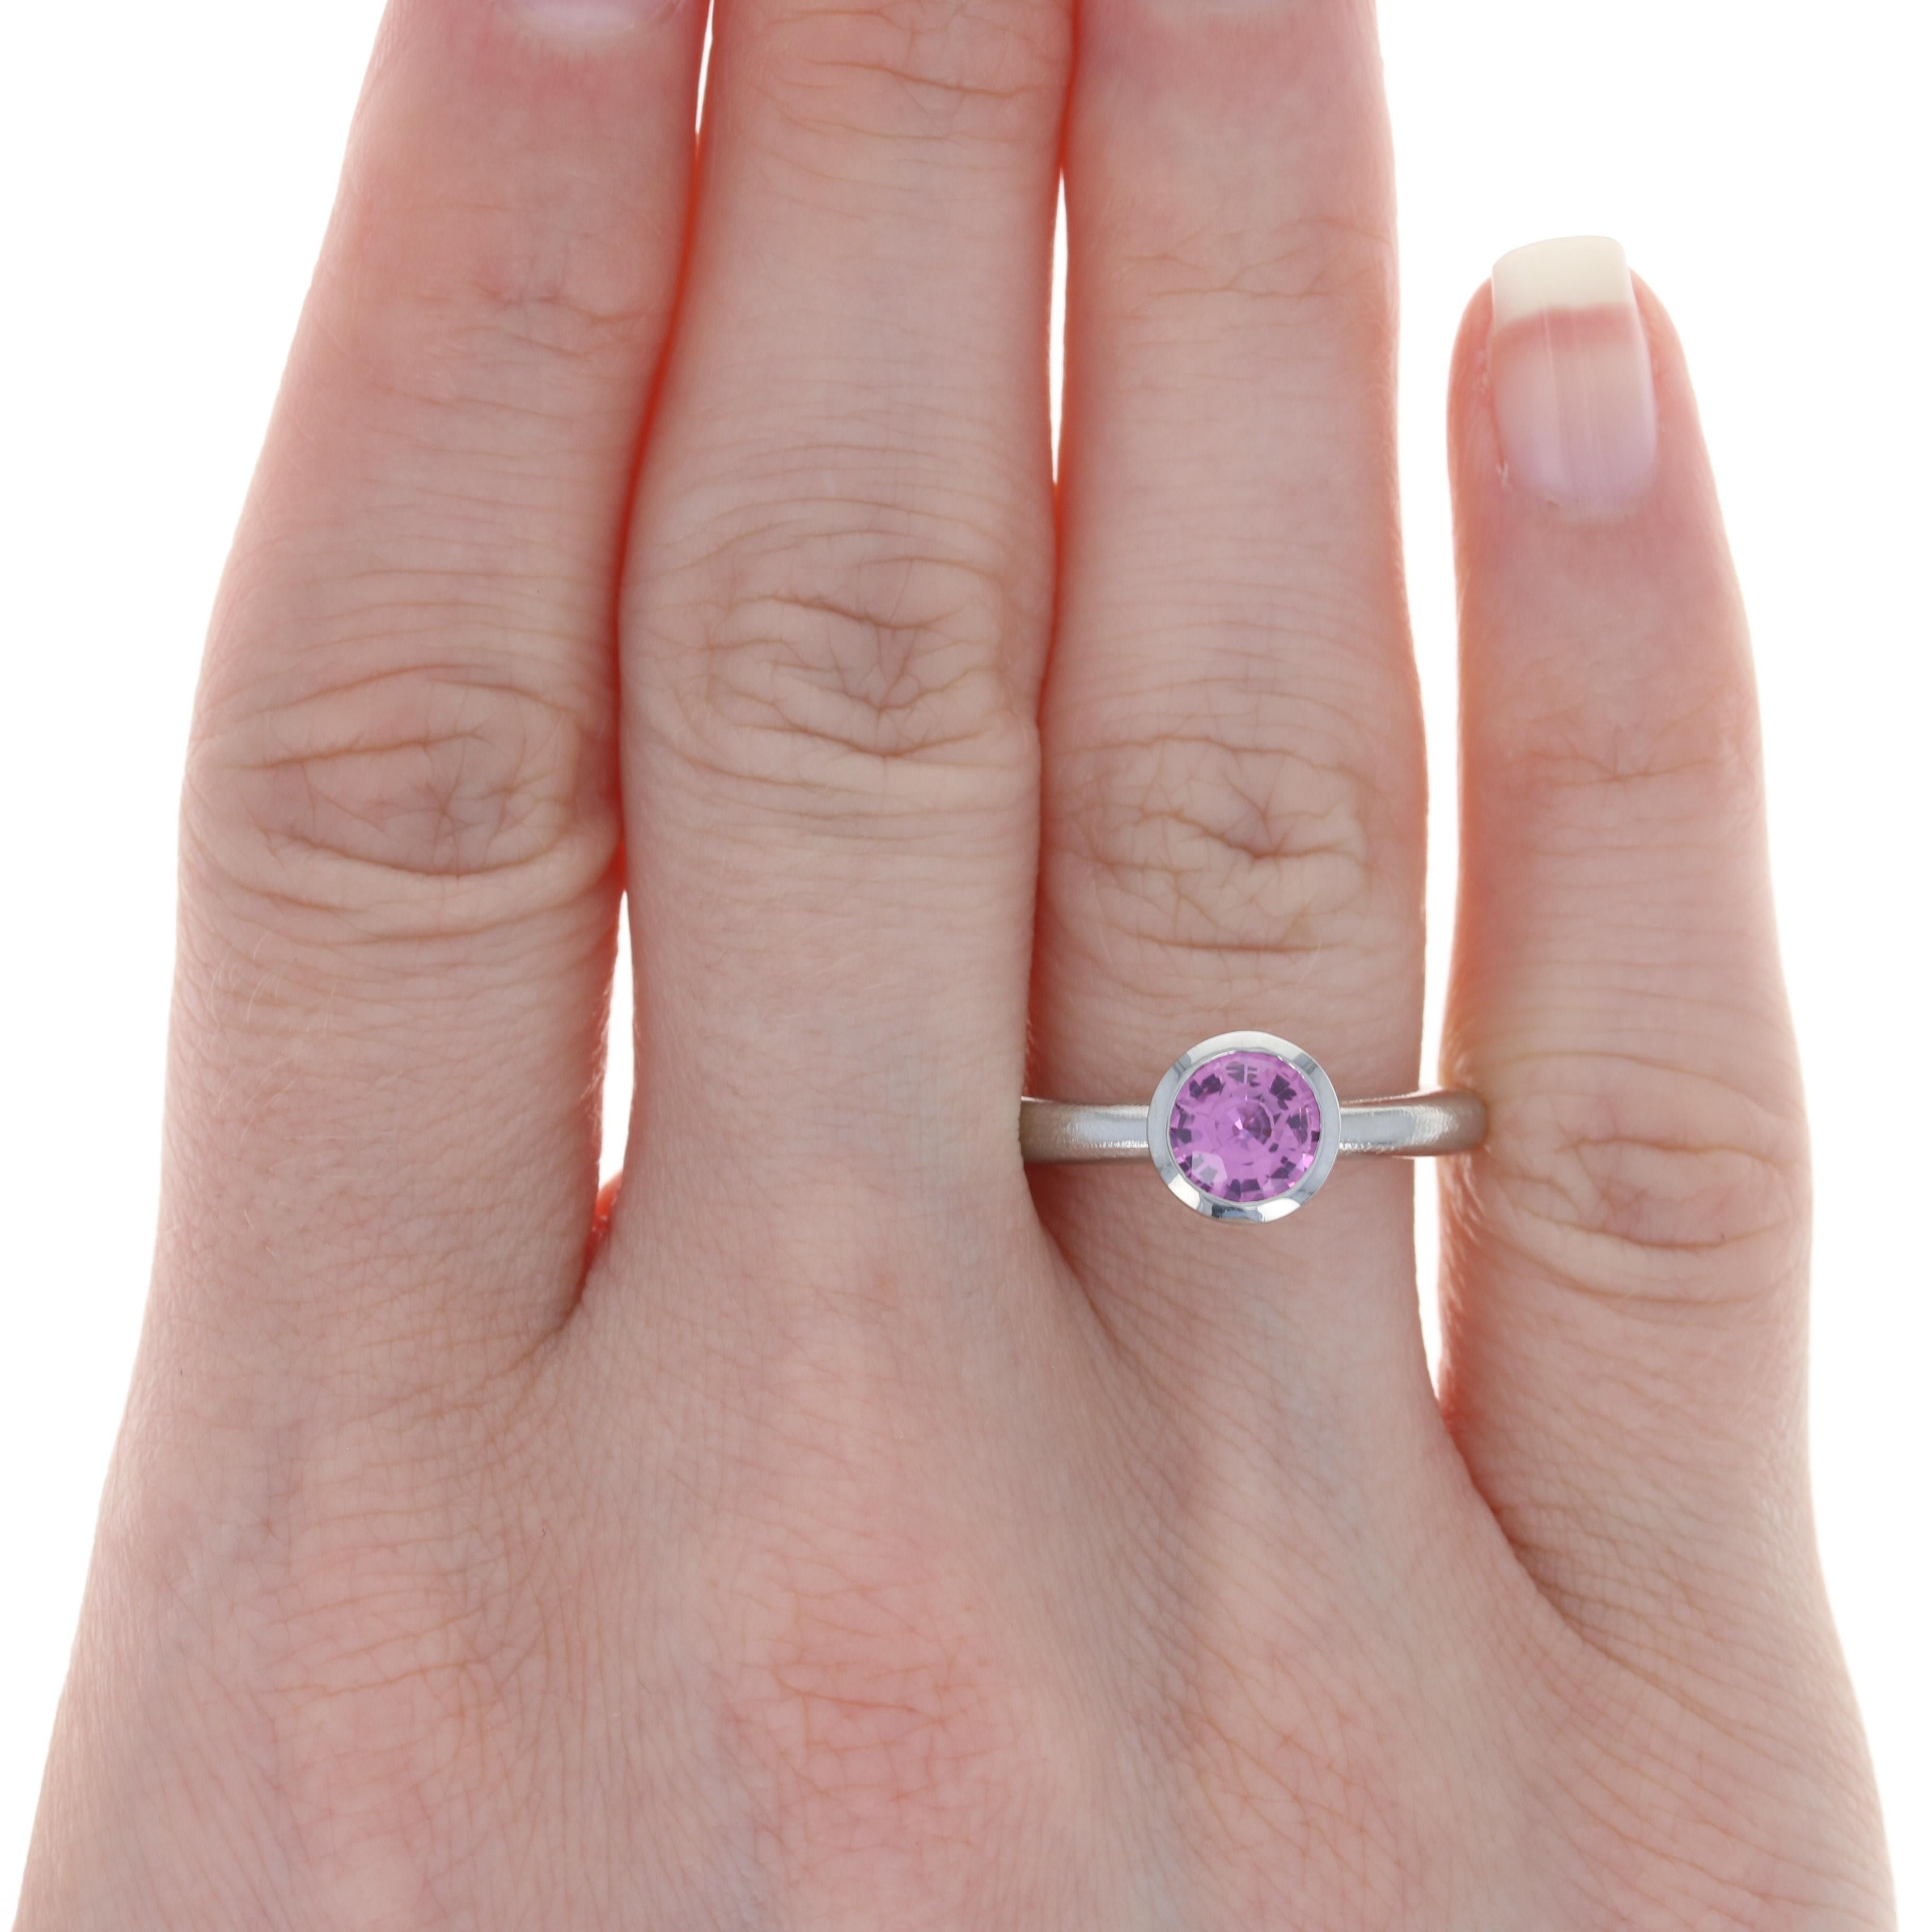 Size:  6 3/4

Metal Content: Palladium

Stone Information: 
Genuine Sapphire
Treatment: Heating
Carat: 1.40ct
Cut: Round
Color: Pink

Style: Solitaire 
Features: Brushed & Smooth Finishes

Face Height (north to south): 5/16